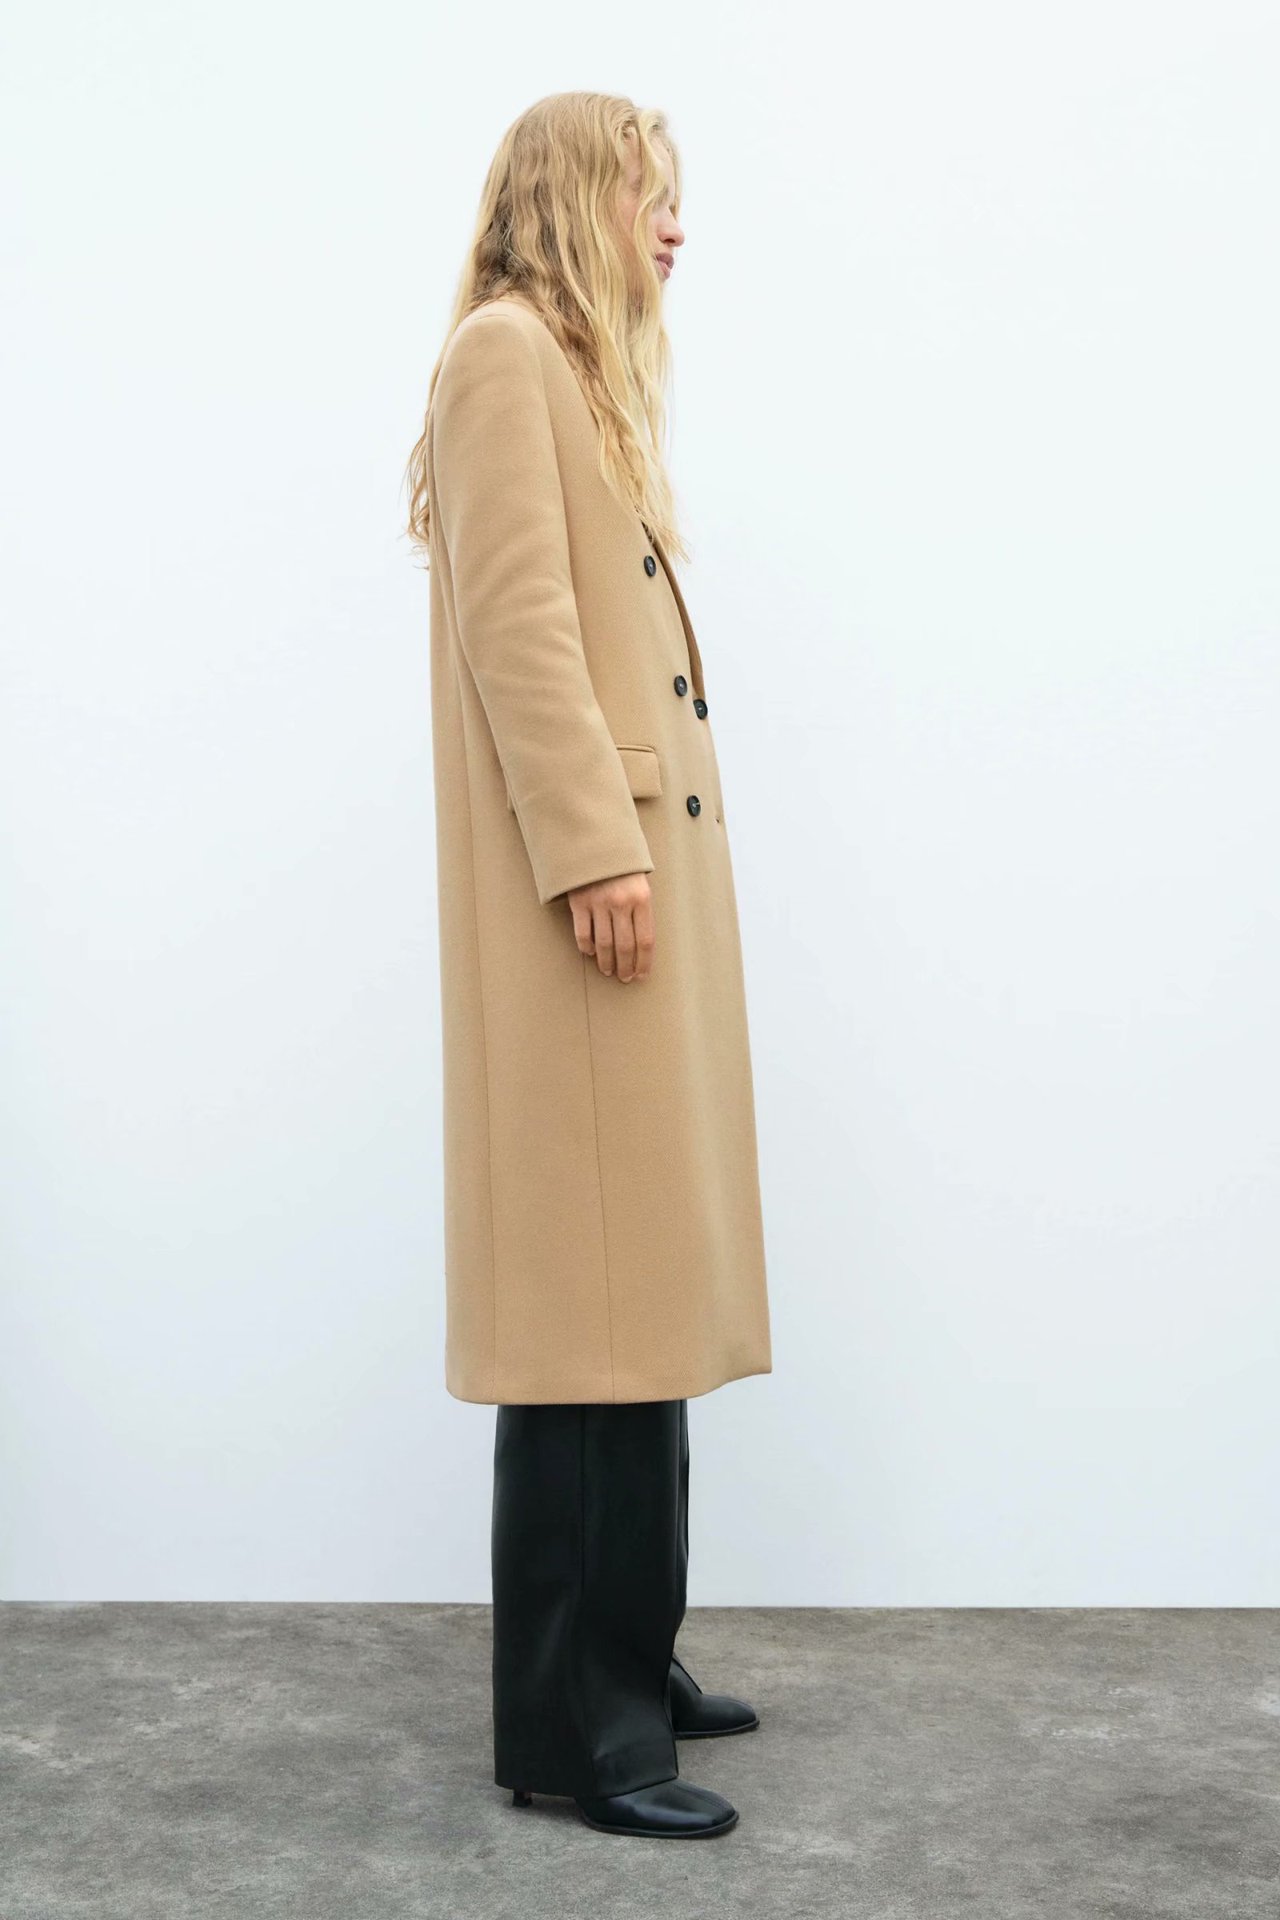 long double-breasted woolen coat jacket nihaostyles clothing wholesale NSAM82422